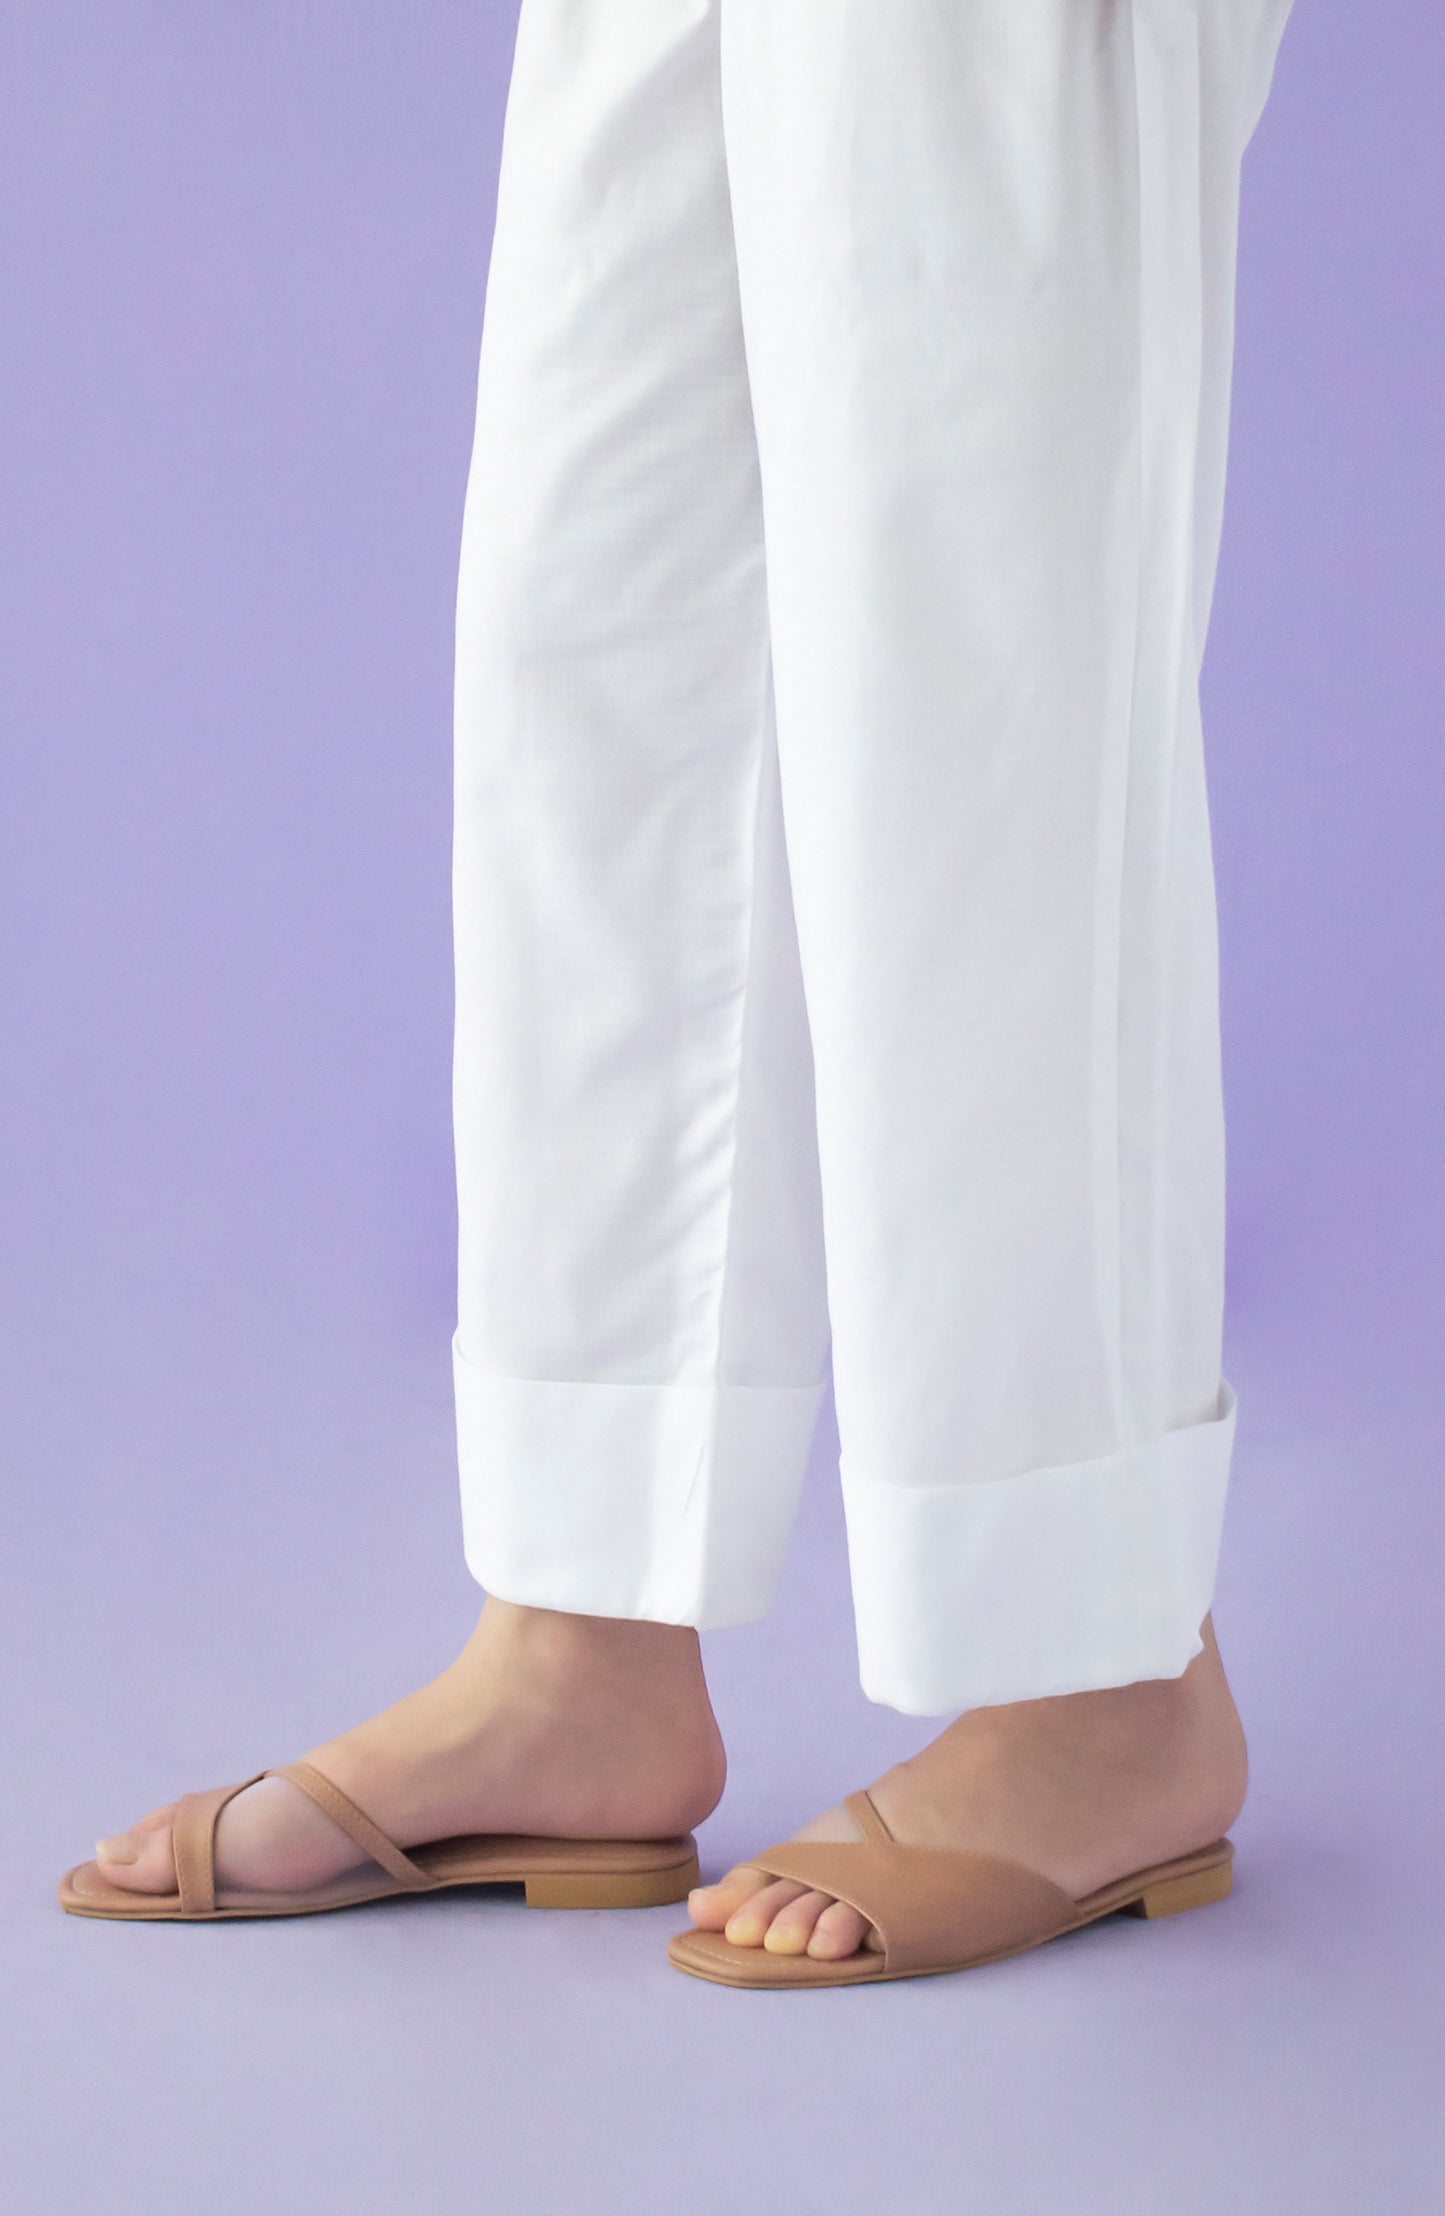 NB-T-PL-23-011 WHITE DOBBY SCTROUSER STITCHED BOTTOMS TROUSER